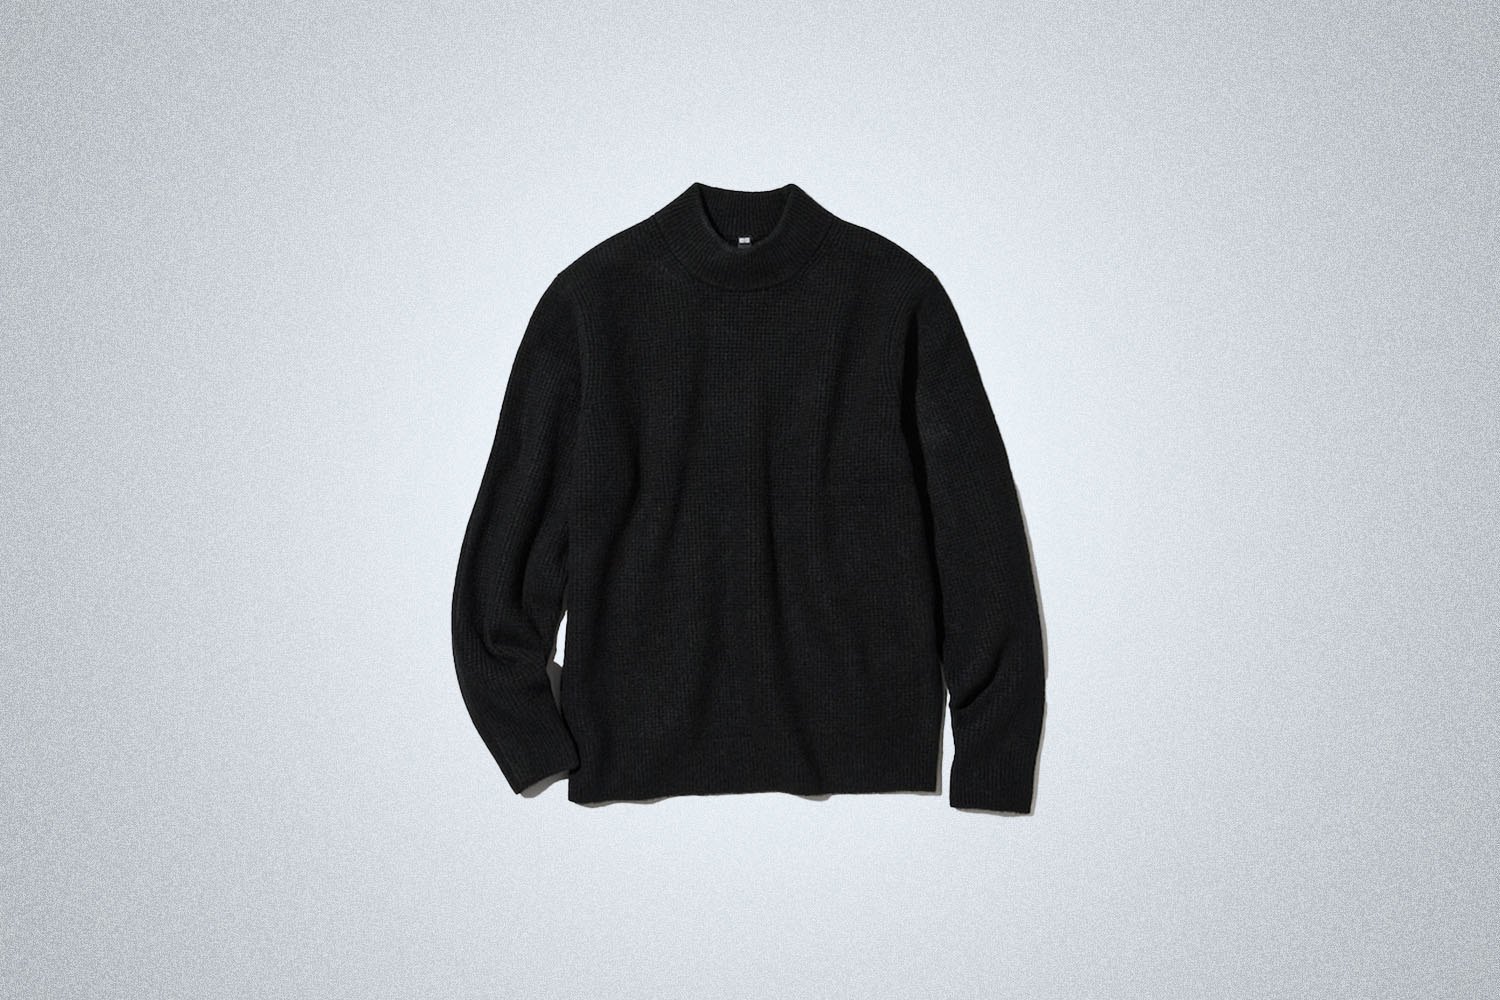 The Uniqlo Mockneck Sweater on a gray background